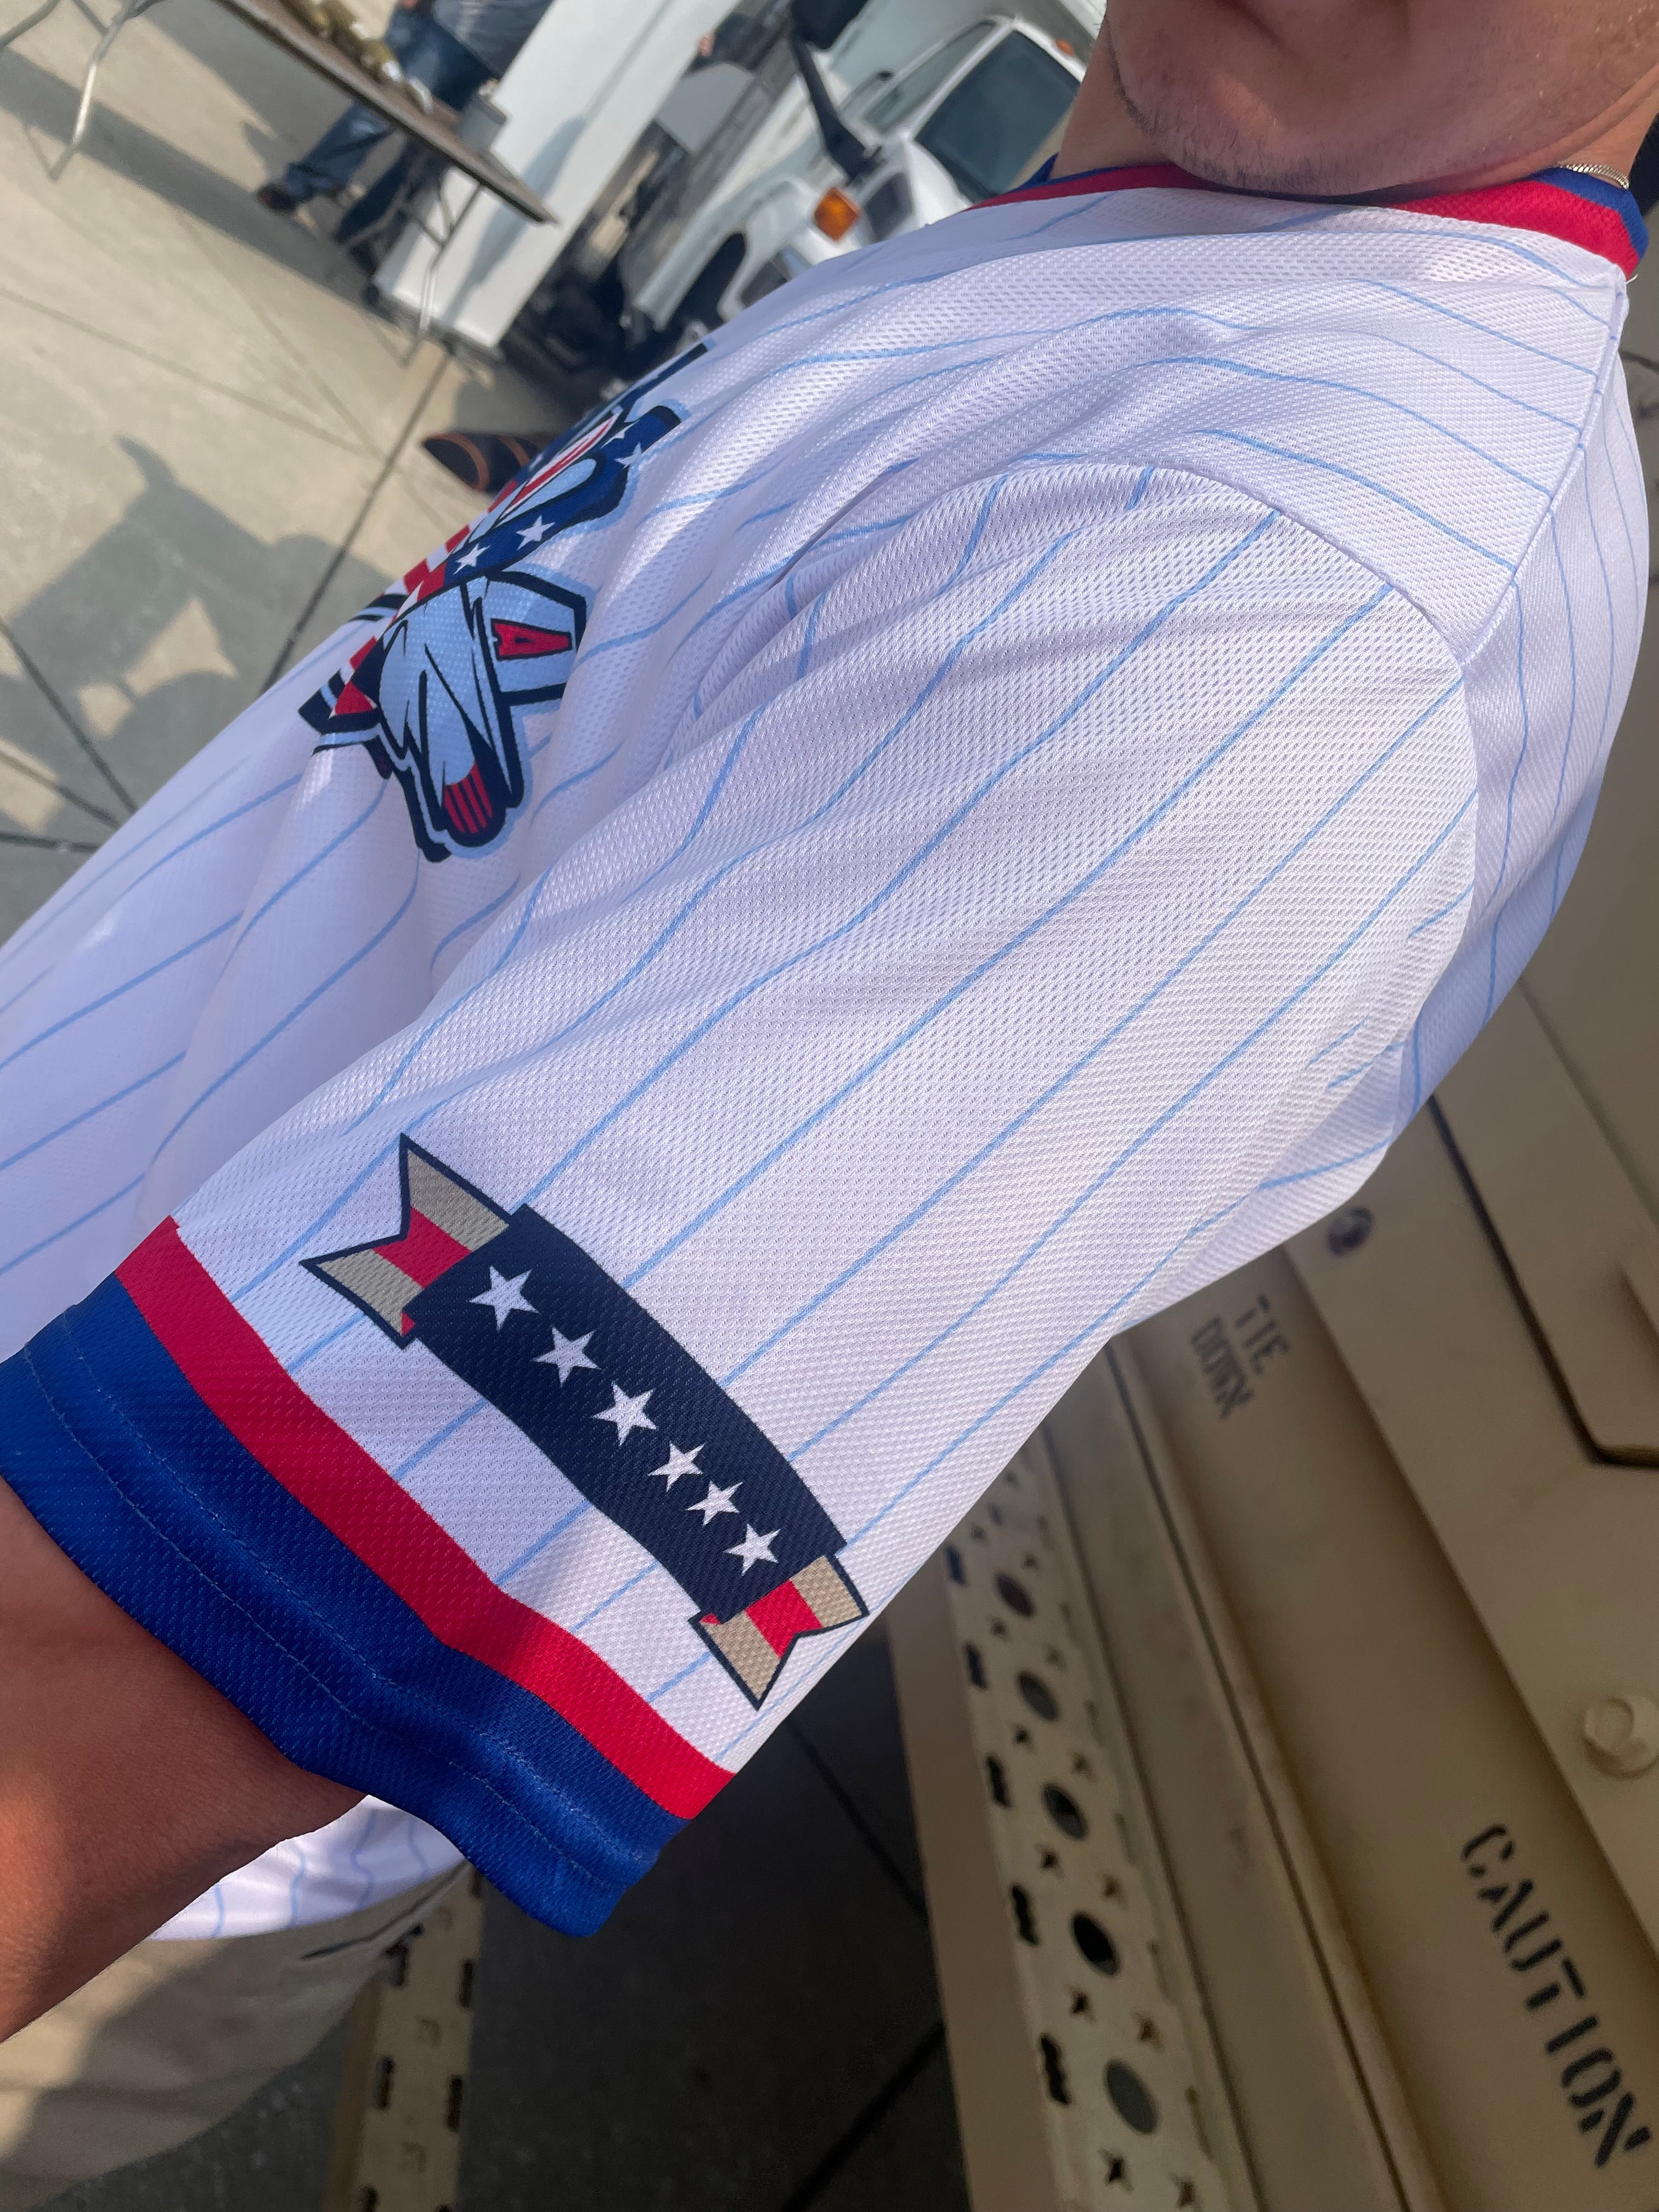 Officially Licensed - US Army Sublimated Baseball Jersey